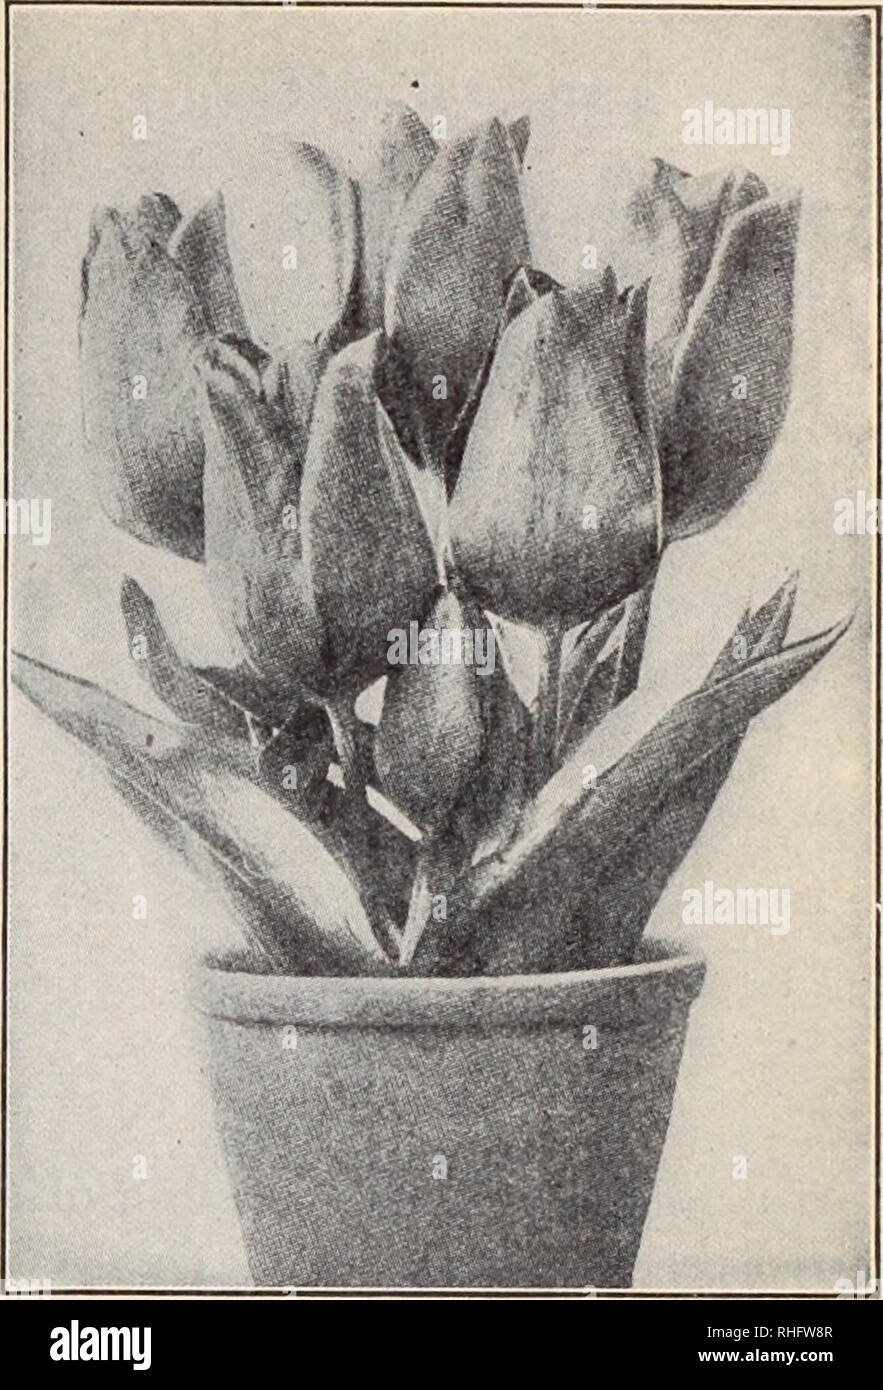 . Boddington's quality bulbs, seeds and plants / Arthur T. Boddington.. Nursery Catalogue. BODDINGTONS ^A^ClÂ£Uyi/ BULBS Single Named Tulips ALL. FIRST SIZE FLOWERING BULBS ONLY Selected for the best and most showy varieties. Those varieties marked with an isterisk (*) are suitable for forcing; those marked with a dagger (f) are suitable for jedding, and flower evenly and at the same time. Those marked with asterisk (*) and dagger (t) are good for either purpose. Single Red Tulips fArtus, Dark scarlet I [â ' Belle Alliance. Scarlet; good bedder or forcer h'Brutus. Orange-crimson ; good forcer  Stock Photo